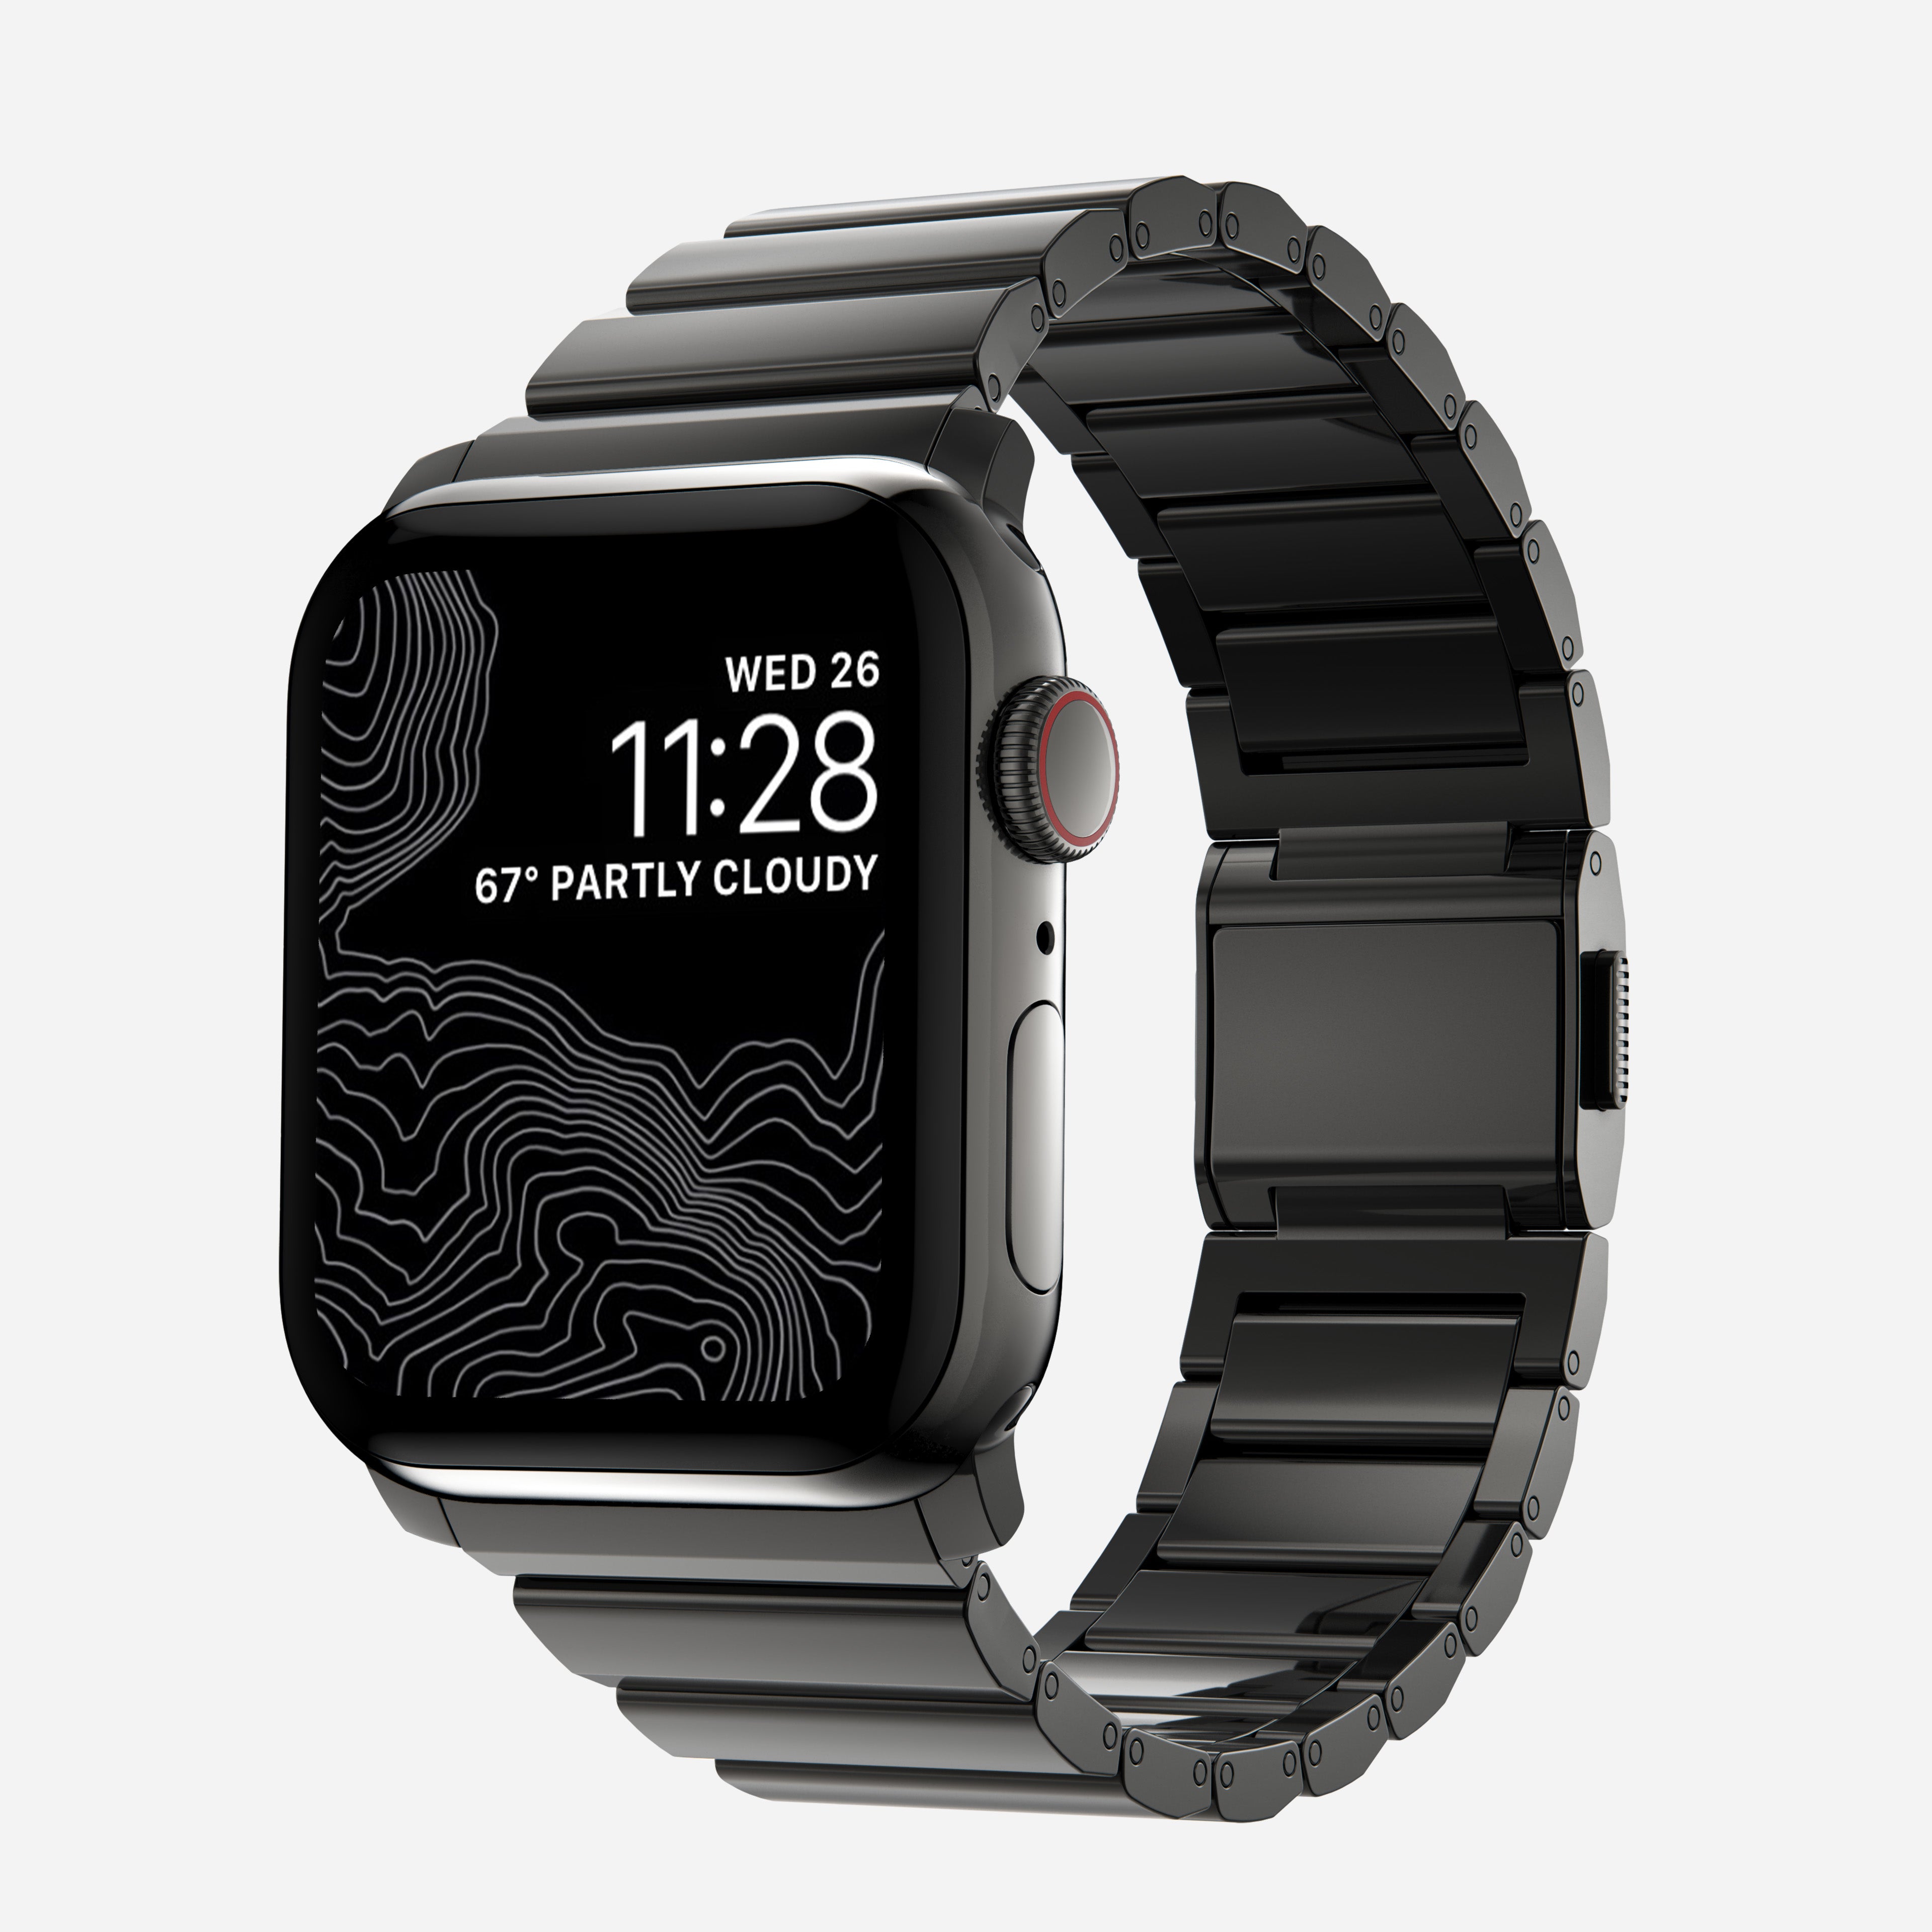 Nomad Apple Watch Ultra bands: Waterproof bands a rugged as the watch